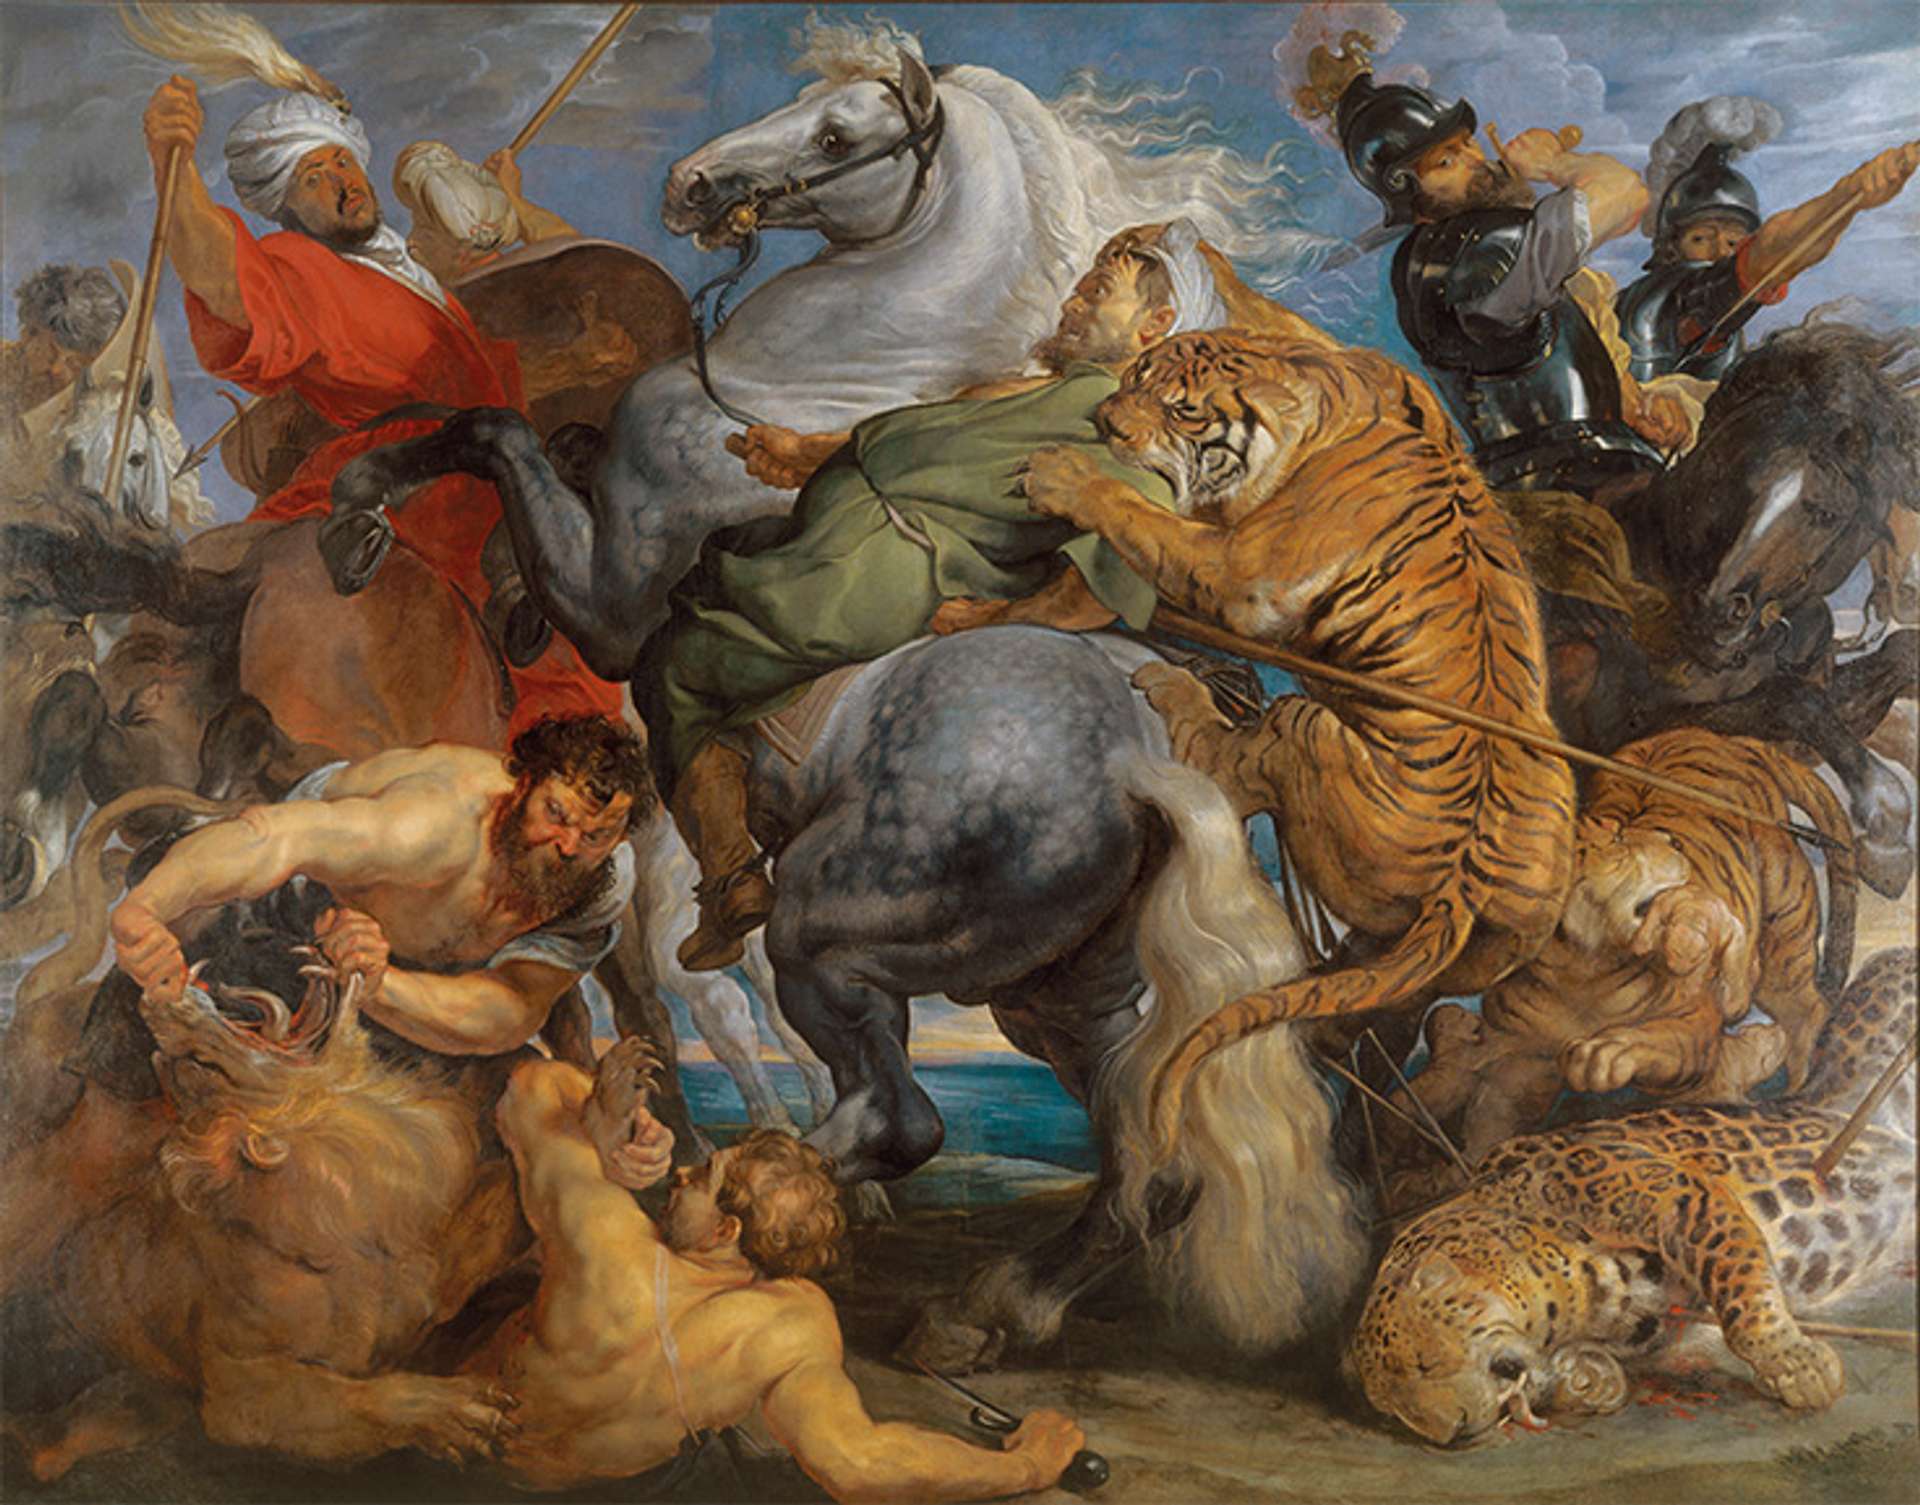 A painting depicting a dramatic battle scene between humans and animals. In the lower right, a man fiercely struggles with a lion as it tears open its jaw. Meanwhile, in the center of the canvas, a tiger attacks a man, causing him to fall from a white horse. In the lower left, a lifeless cheetah lies on the ground. In the background, additional men on horses engage in combat with other animals.